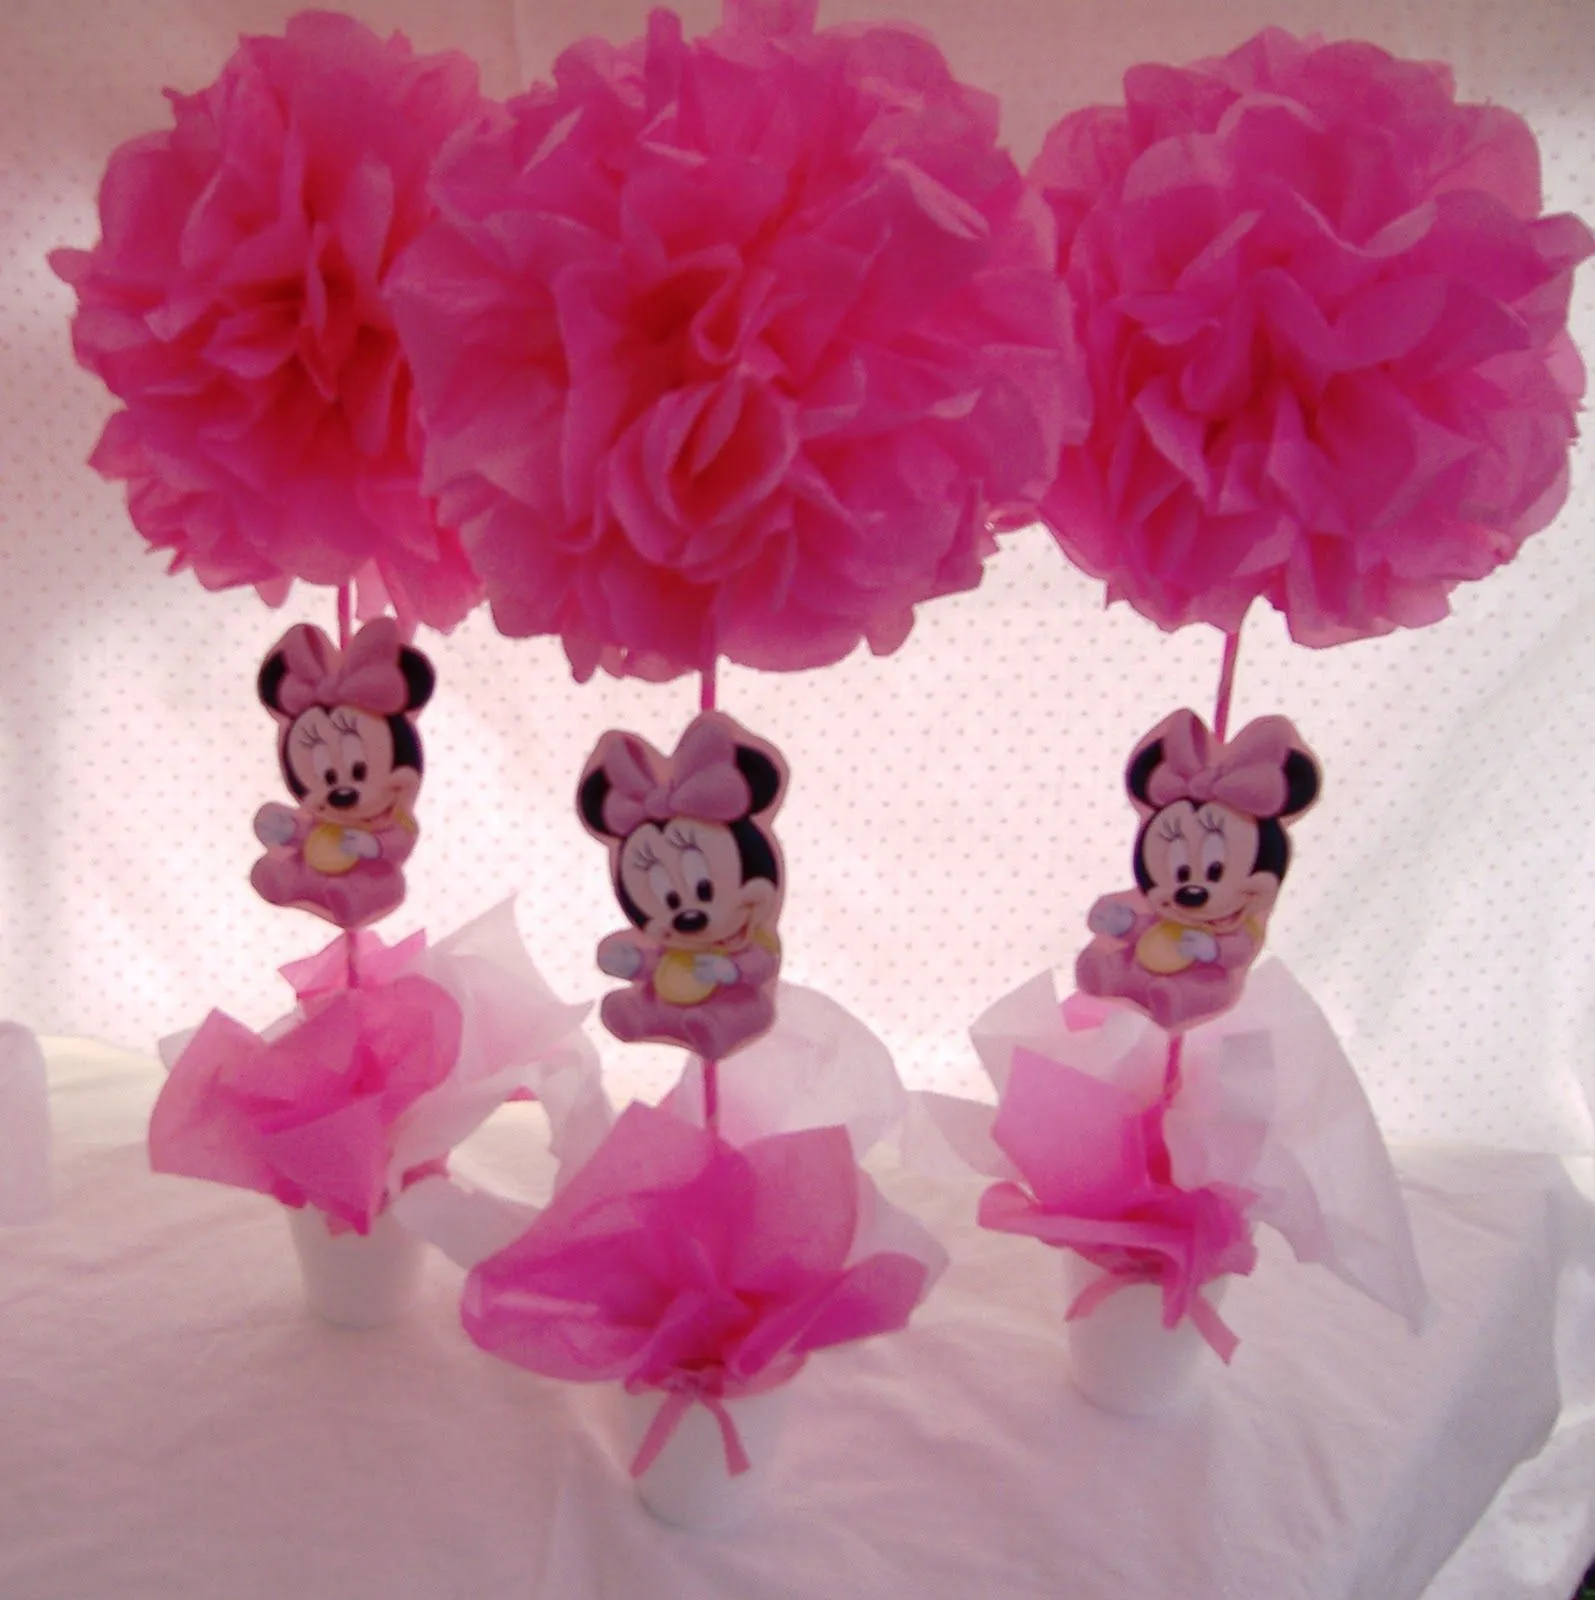 Pin by Paty Lucero on Paty | Pinterest | Ratones, Minnie mouse y Mesas